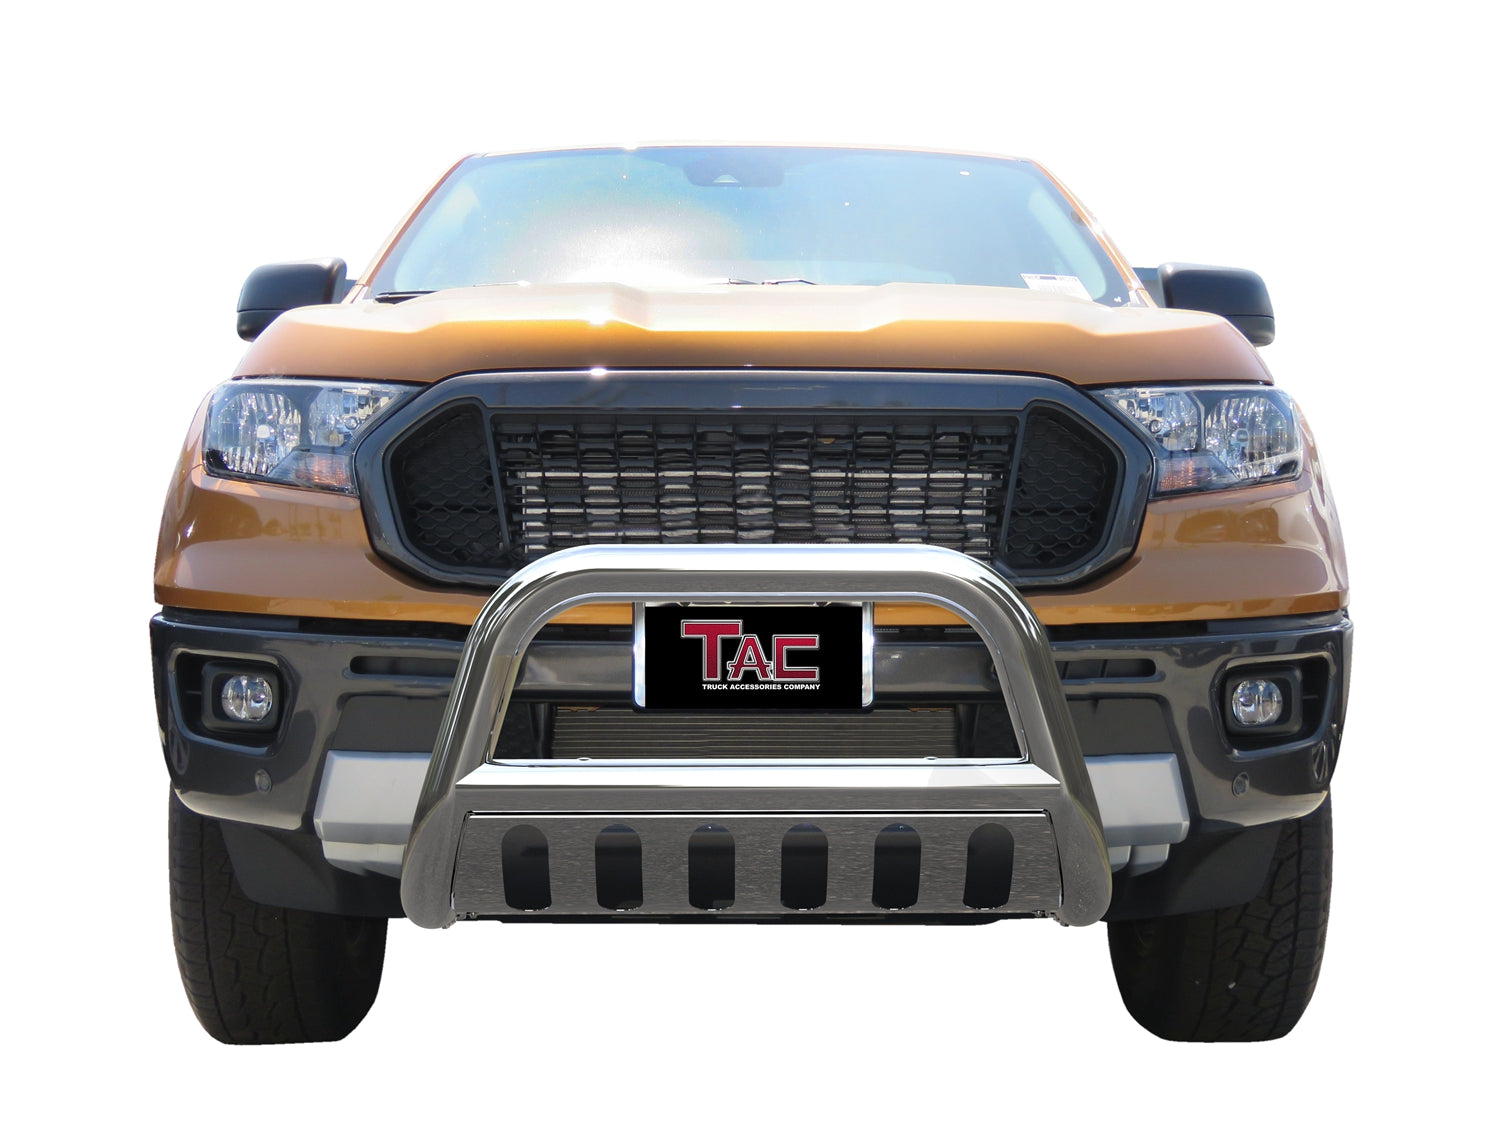 TAC Stainless Steel 3" Bull Bar for 2019-2023 Ford Ranger Truck Front Bumper Brush Grille Guard Nudge Bar - 0